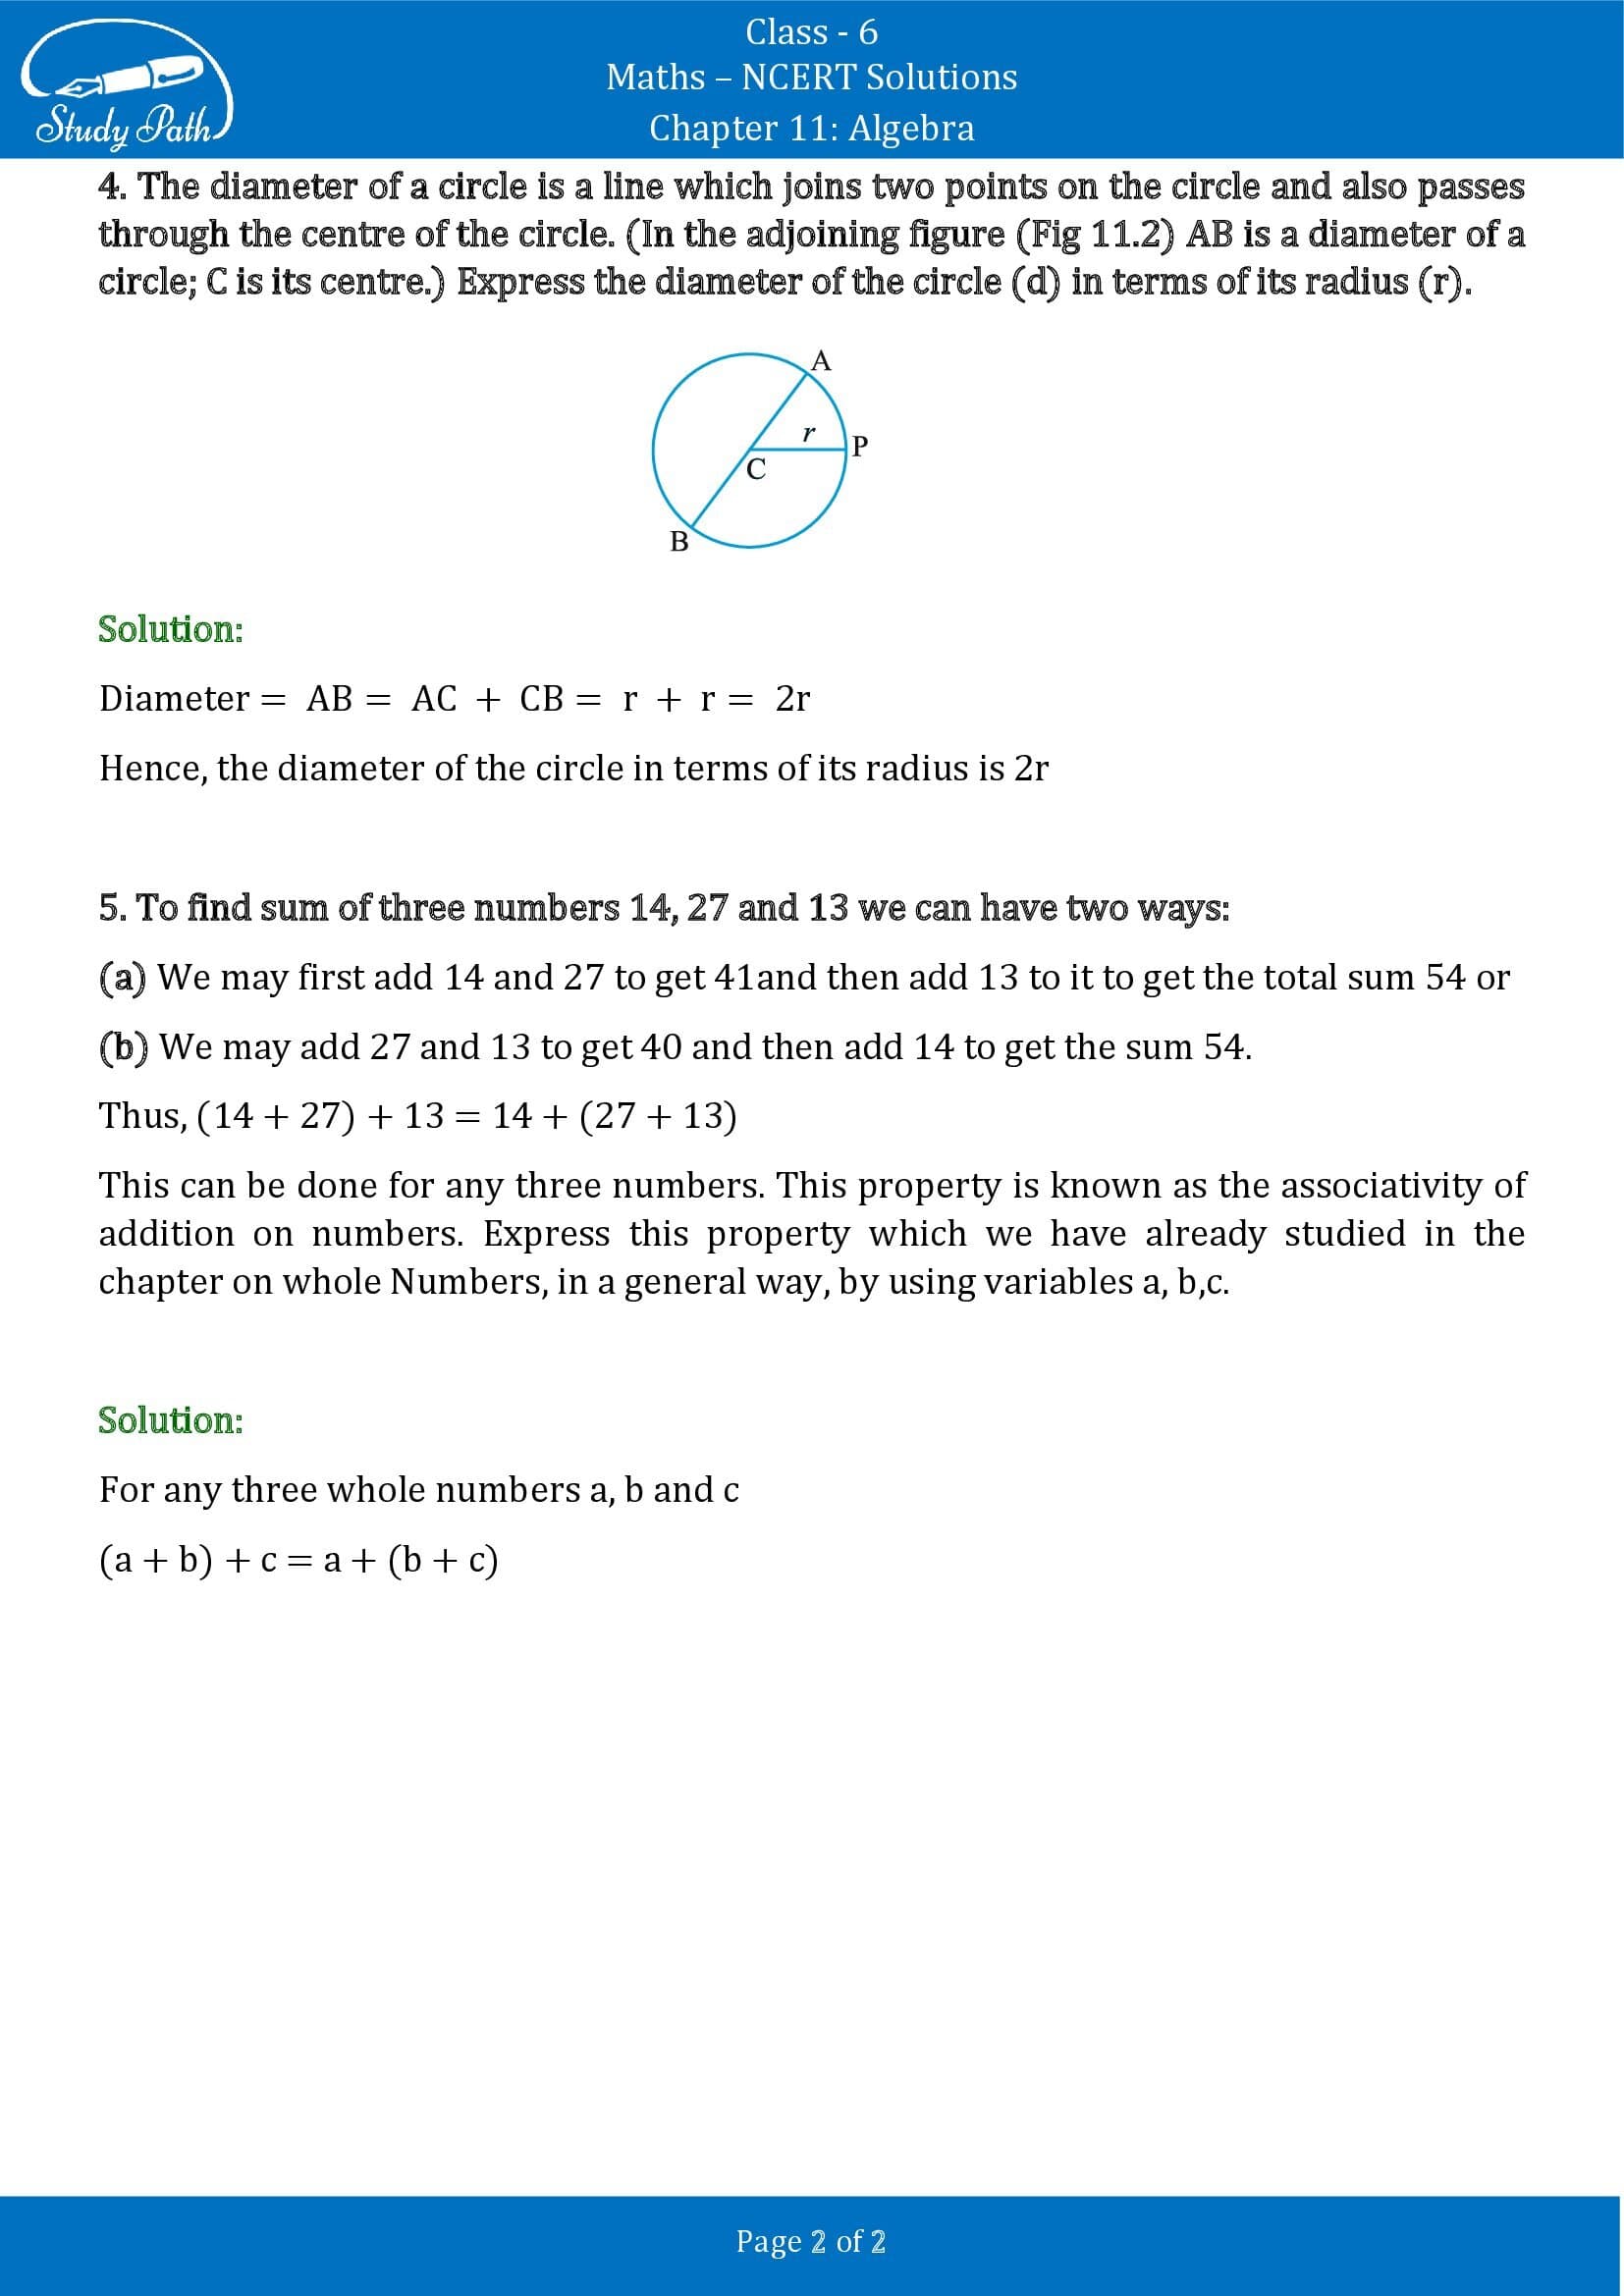 NCERT Solutions for Class 6 Maths Chapter 11 Algebra Exercise 11.2 00002